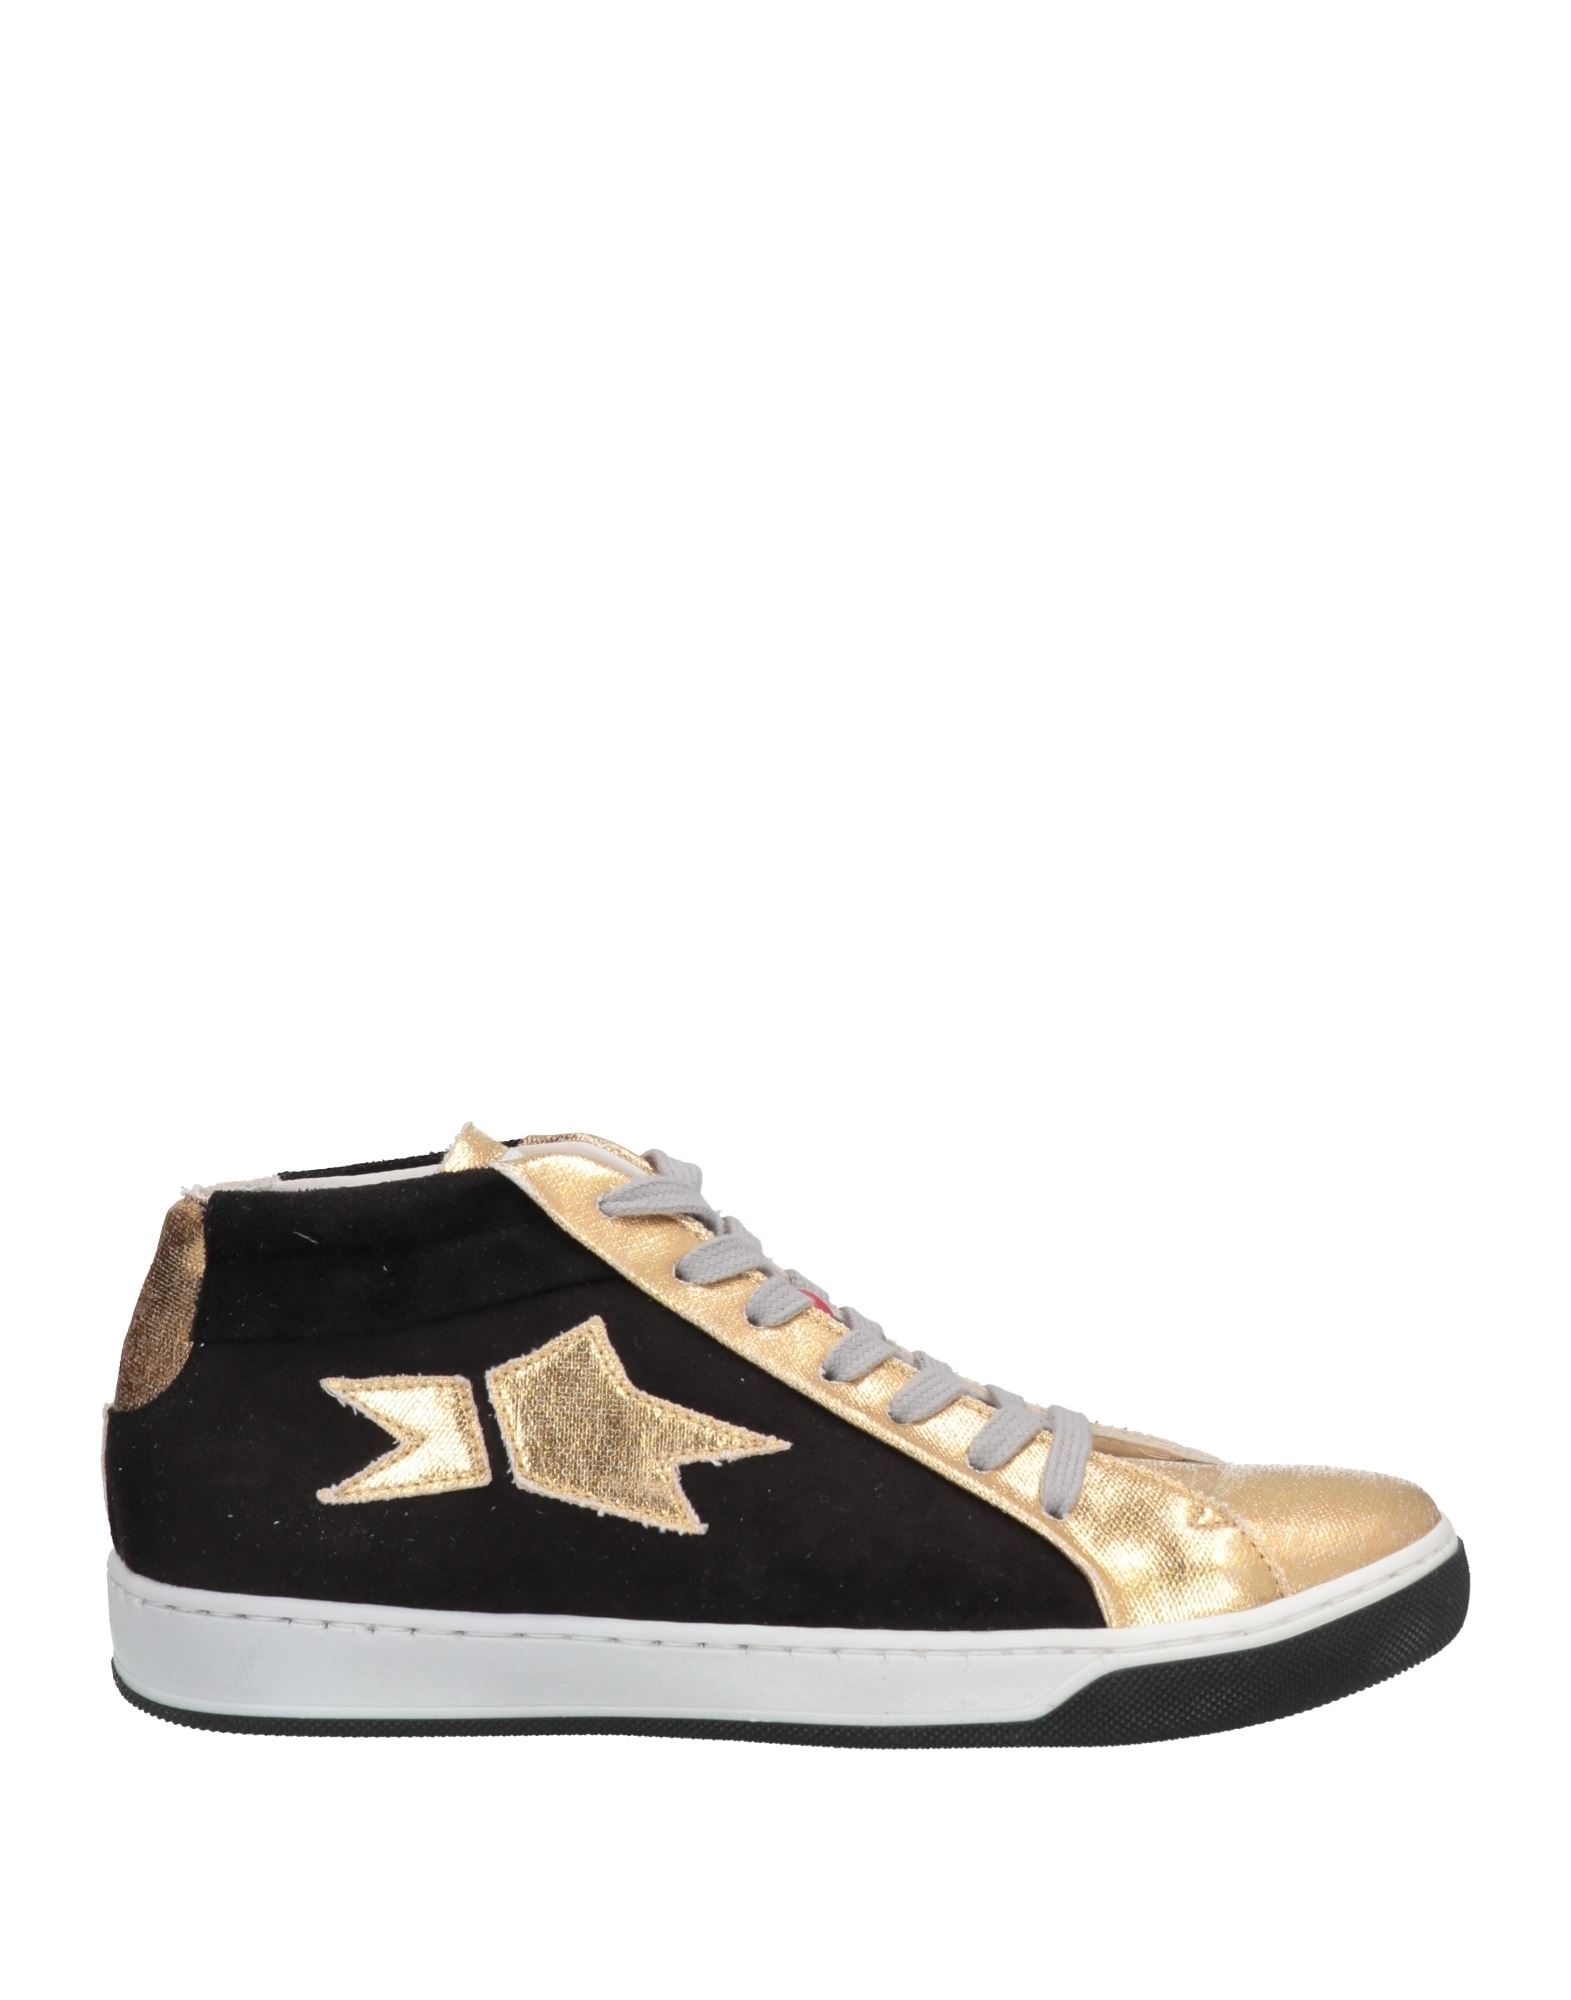 Sequel By Ishikawa Sneakers In Gold